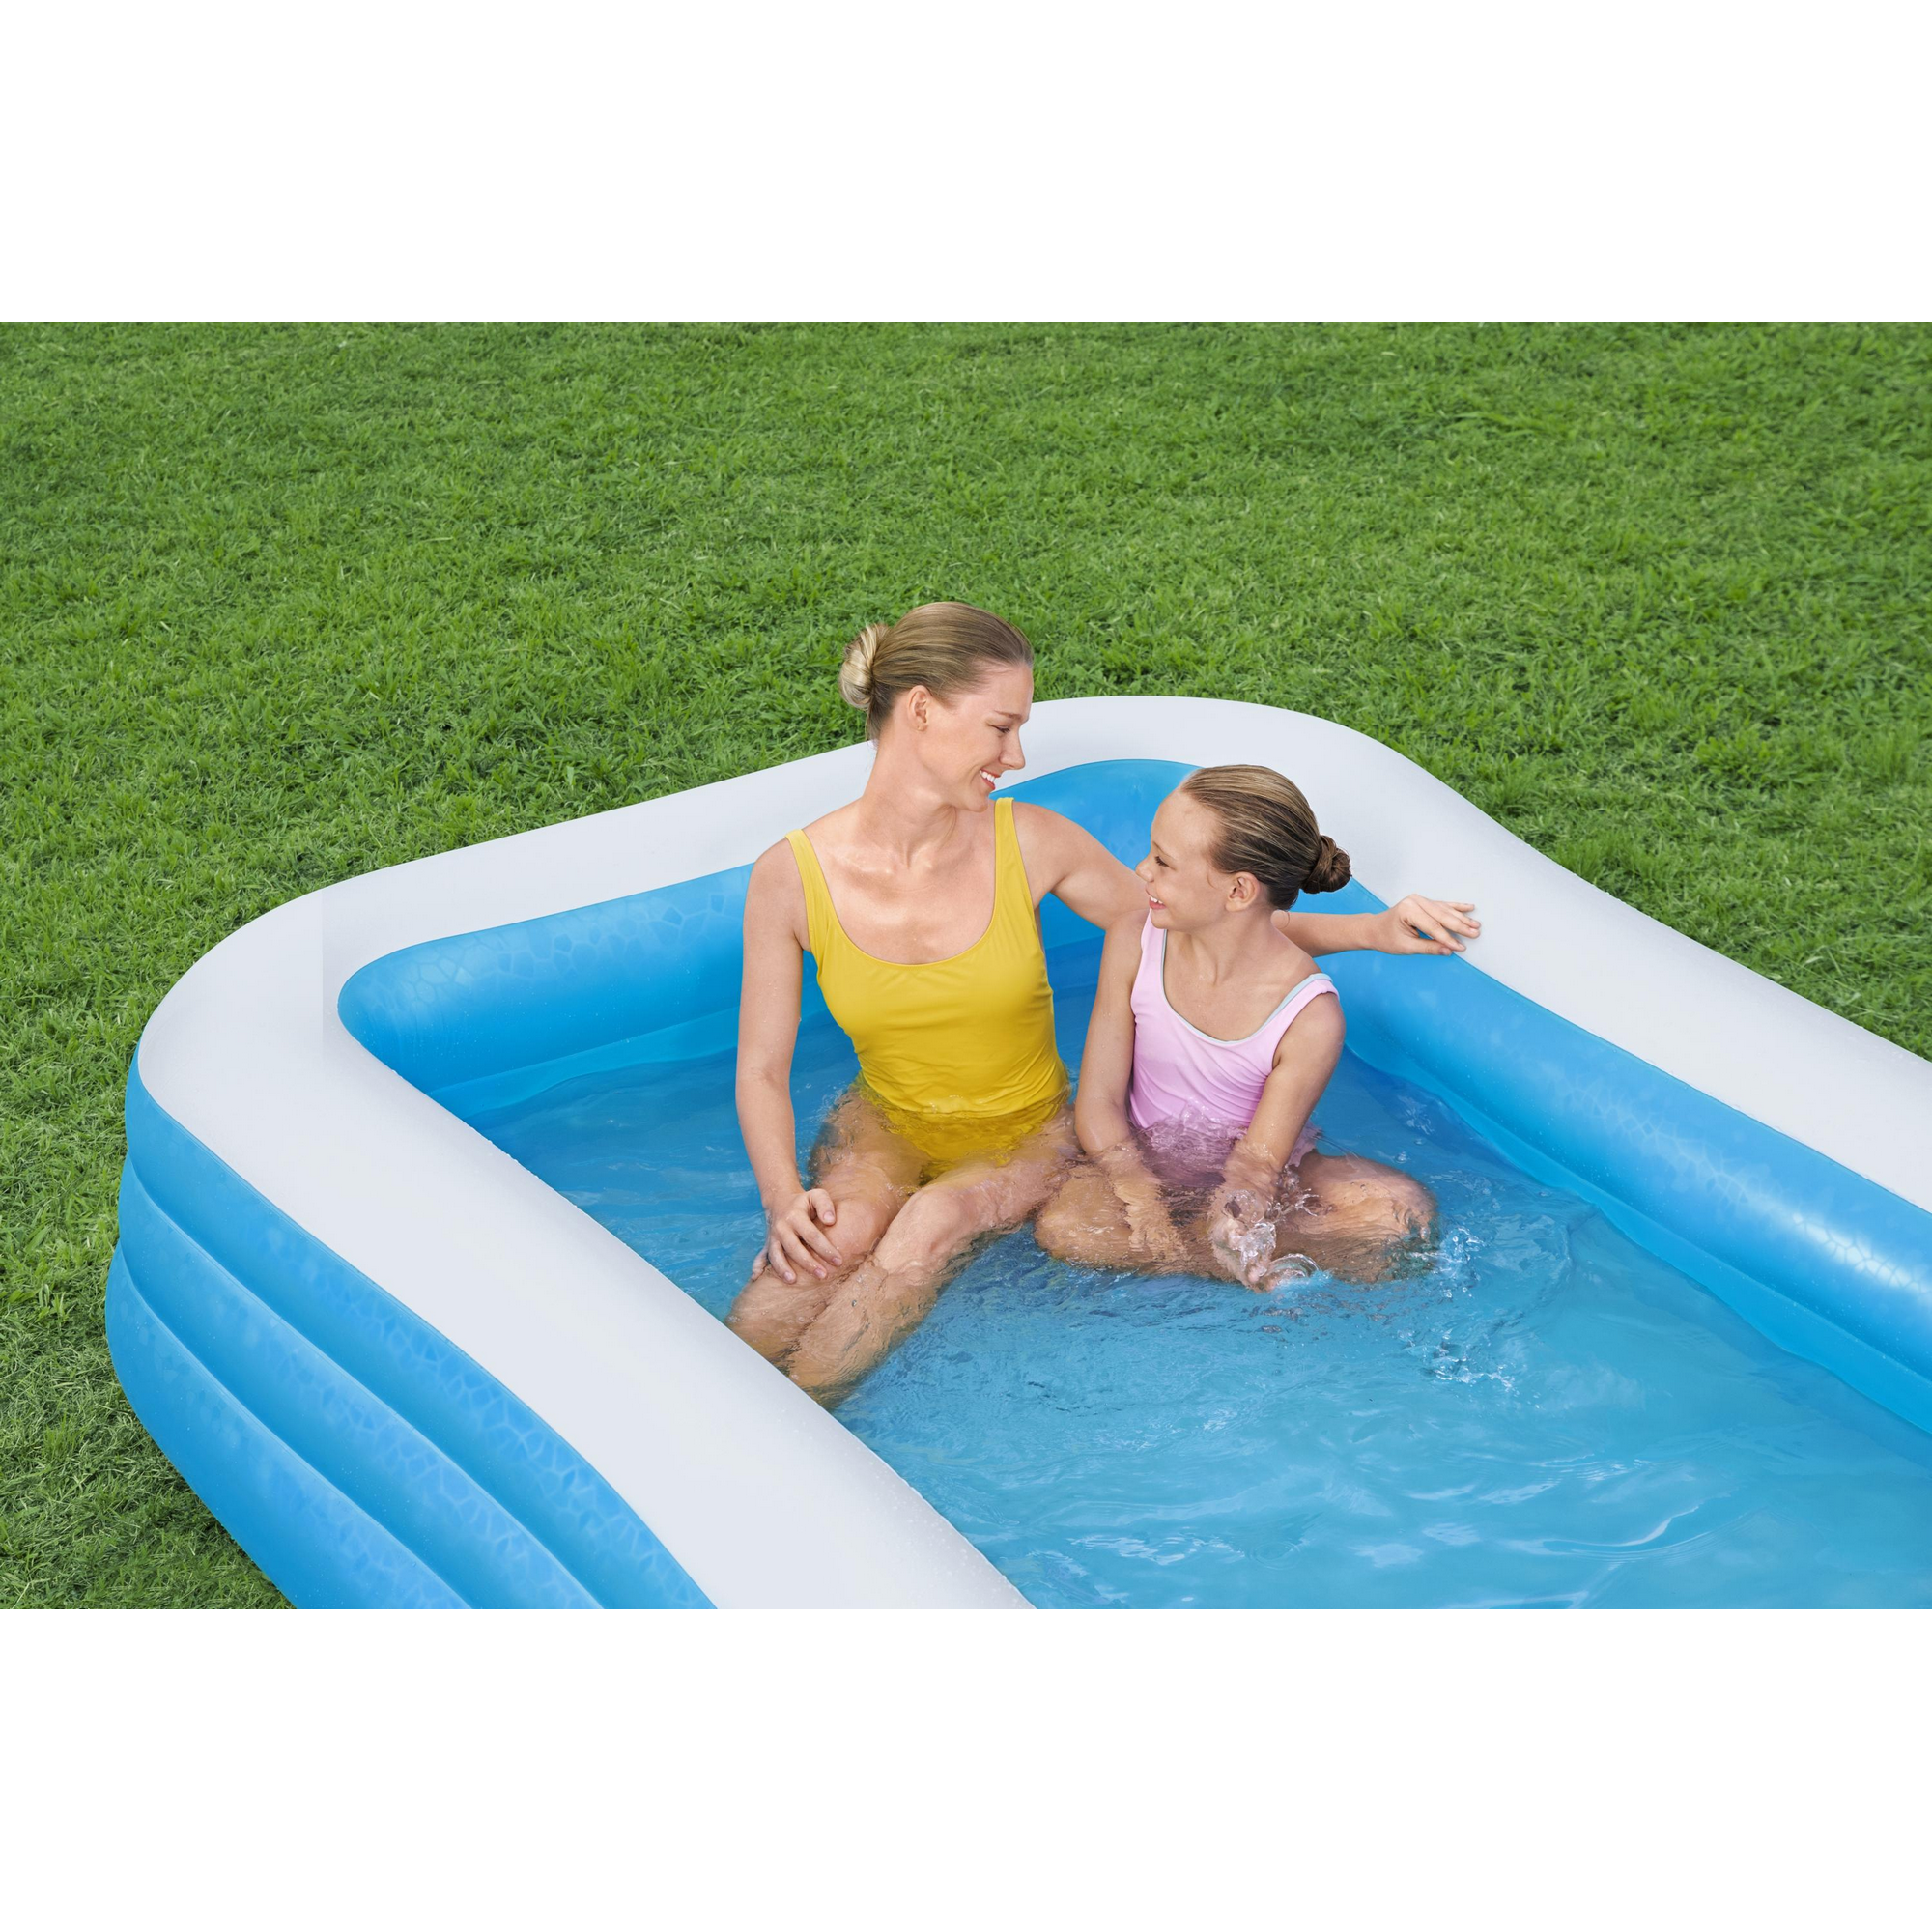 Planschbecken 'Family Pool Deluxe' blau 305 x 183 x 56 cm + product picture